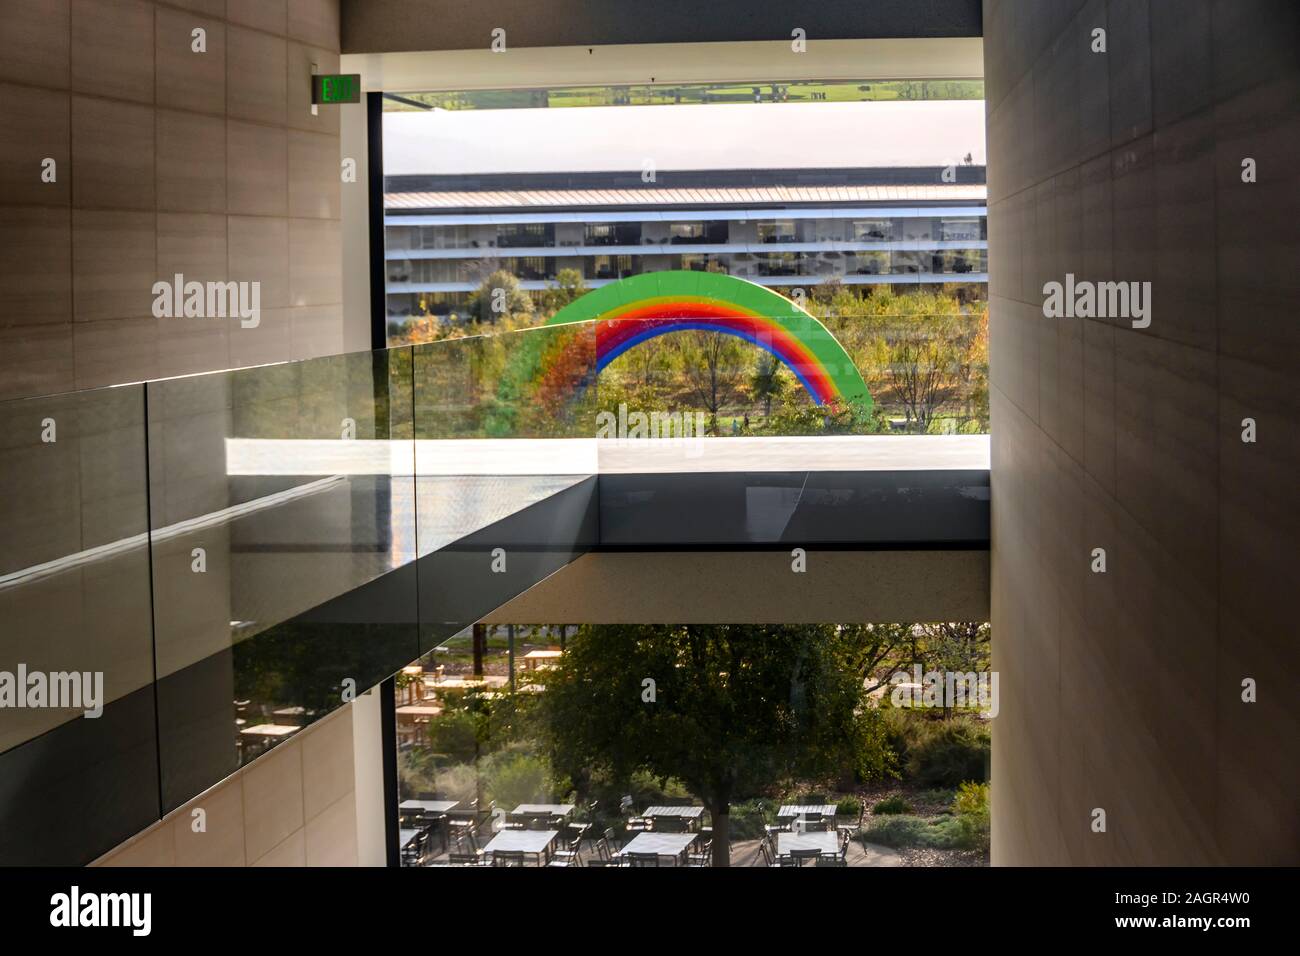 Cupertino CA USA December 14, 2019: Apple headquarters offices building, view from the third floor through glass window to the inner court. Stock Photo